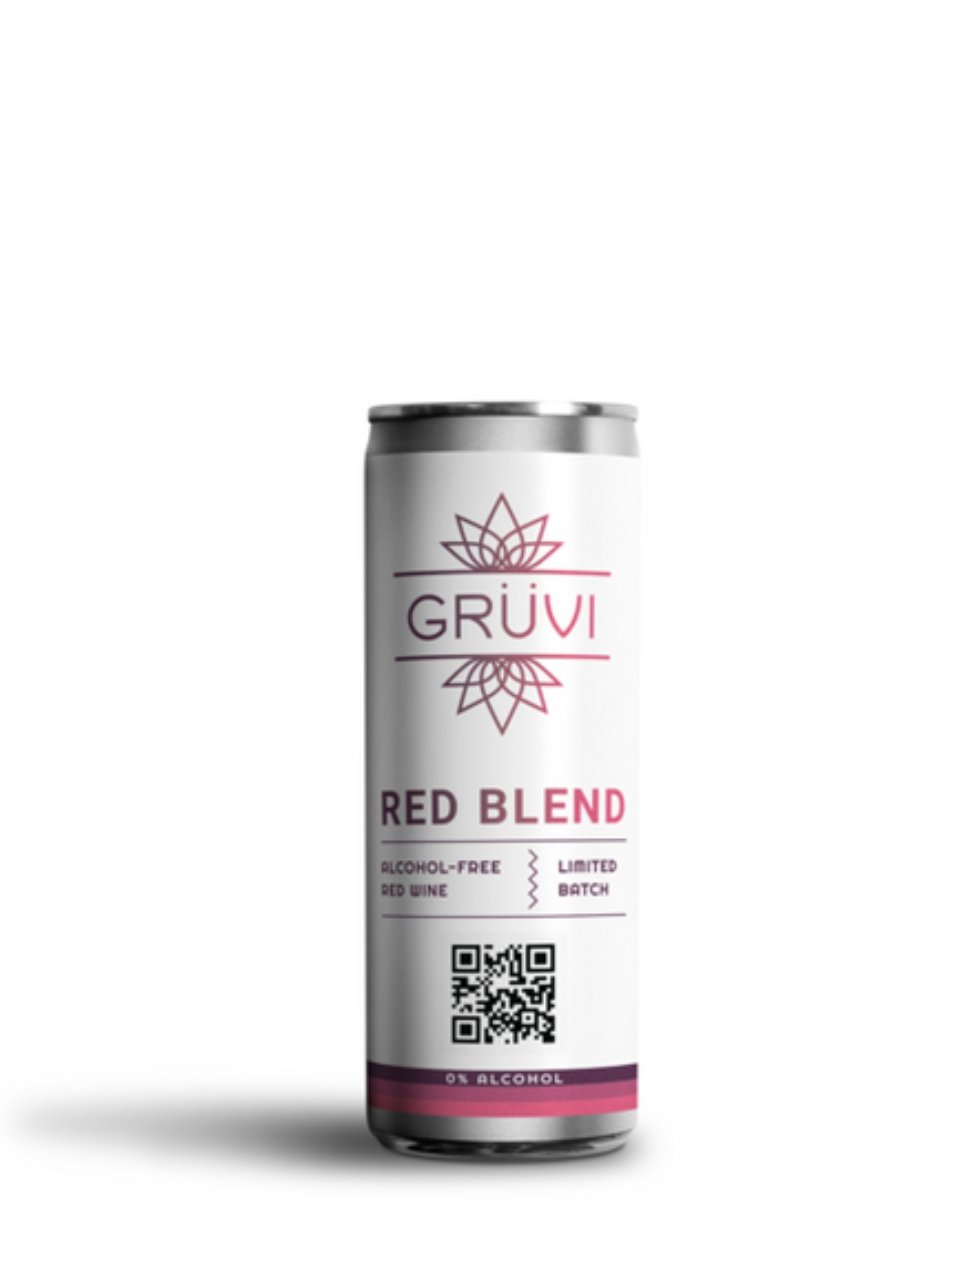 Gruvi Dry Red Blend 4-PACK